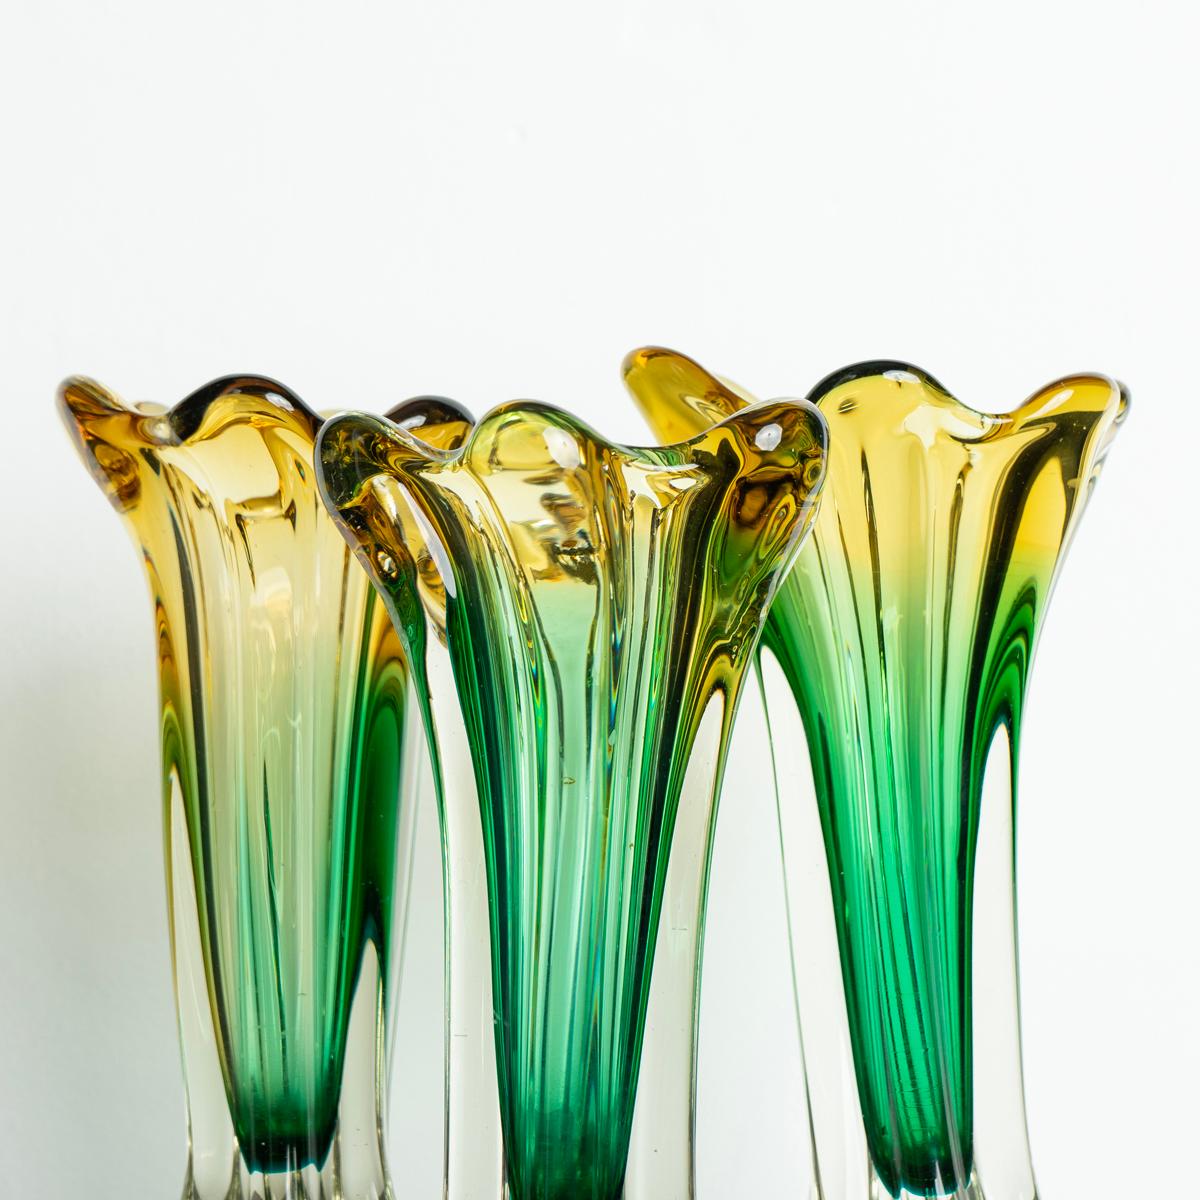 Italian Collection of Vintage Freeform Sommerso Murano Glass Vases, C. 1960s